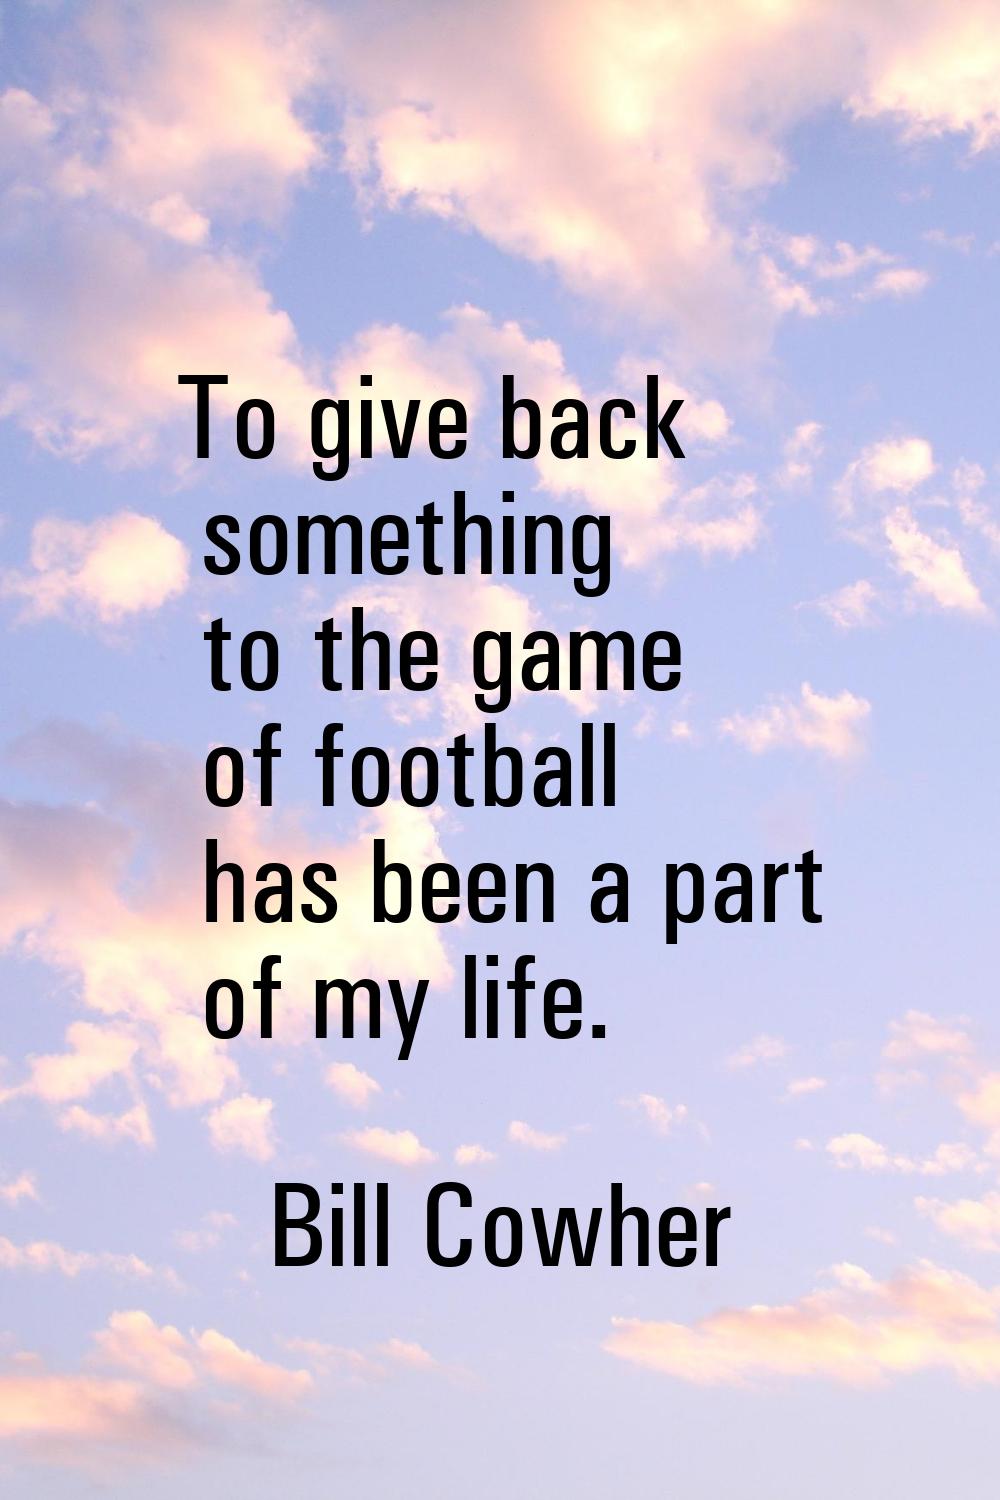 To give back something to the game of football has been a part of my life.